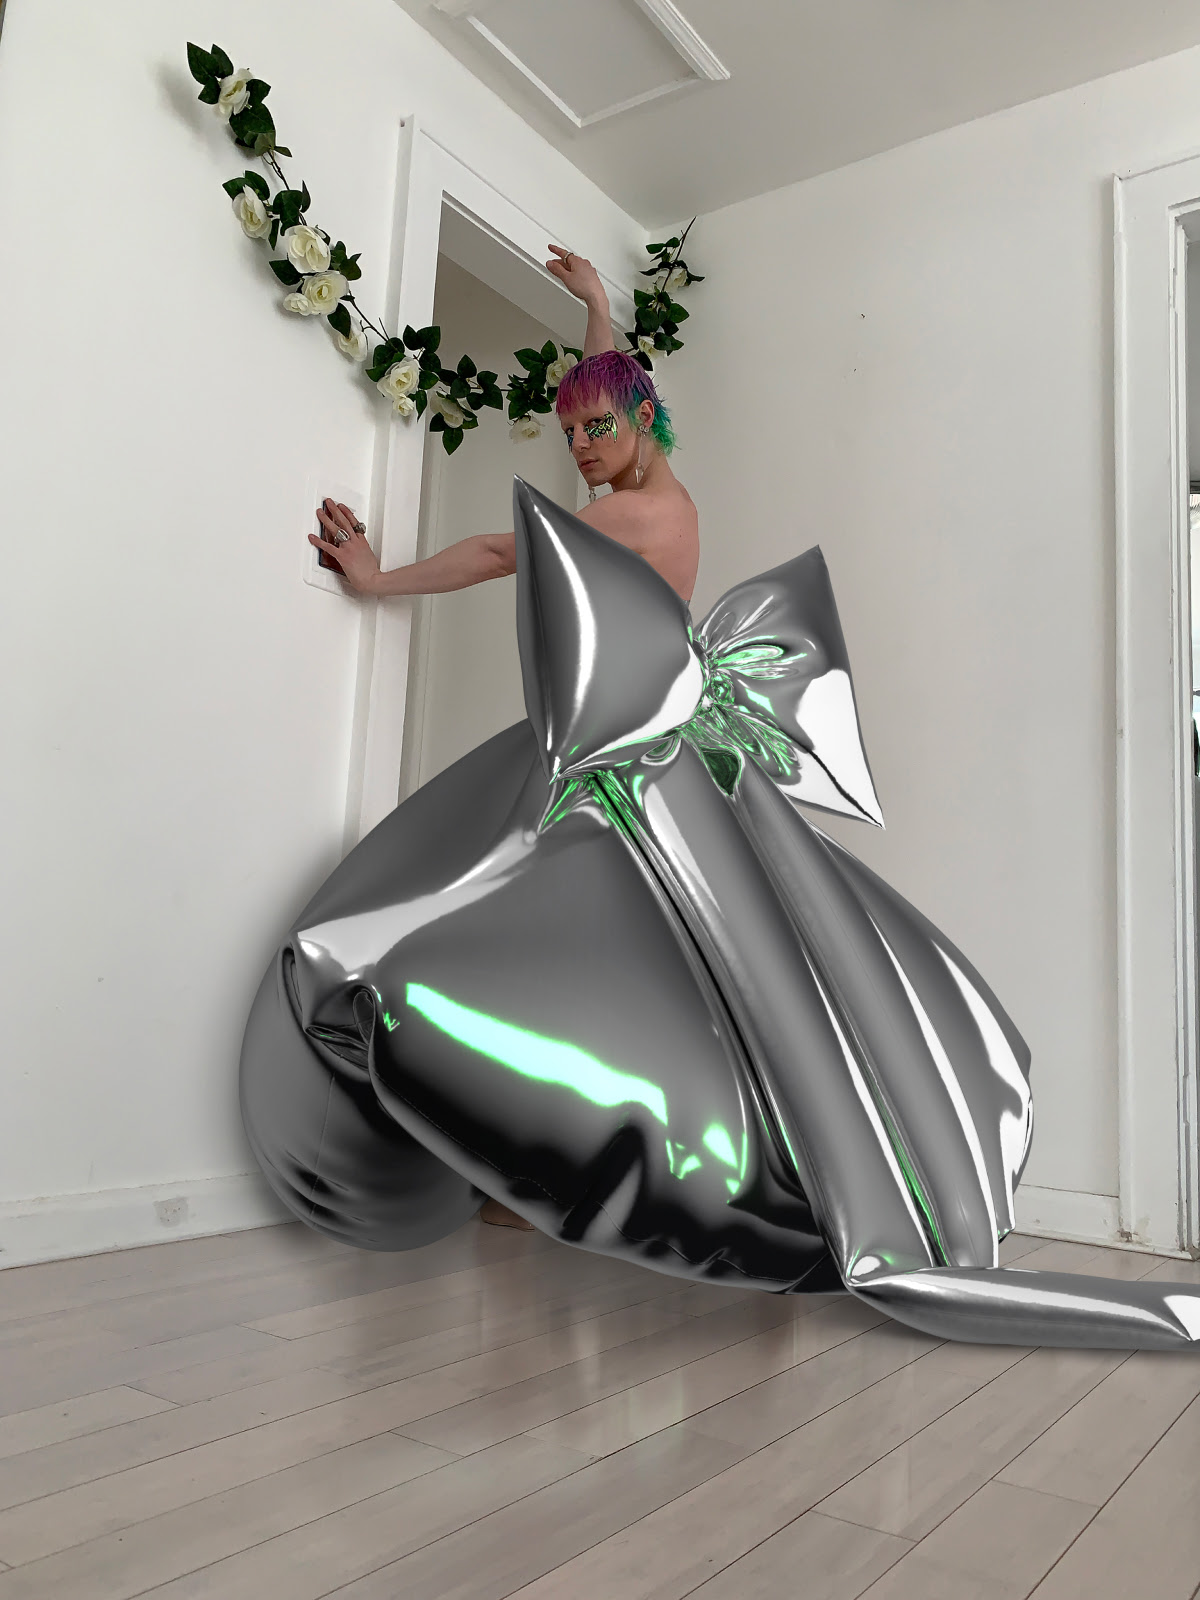 Futuristic fashion examples of 3D fashion design created in CLO 3D available to dress as photo fitting and AR skins